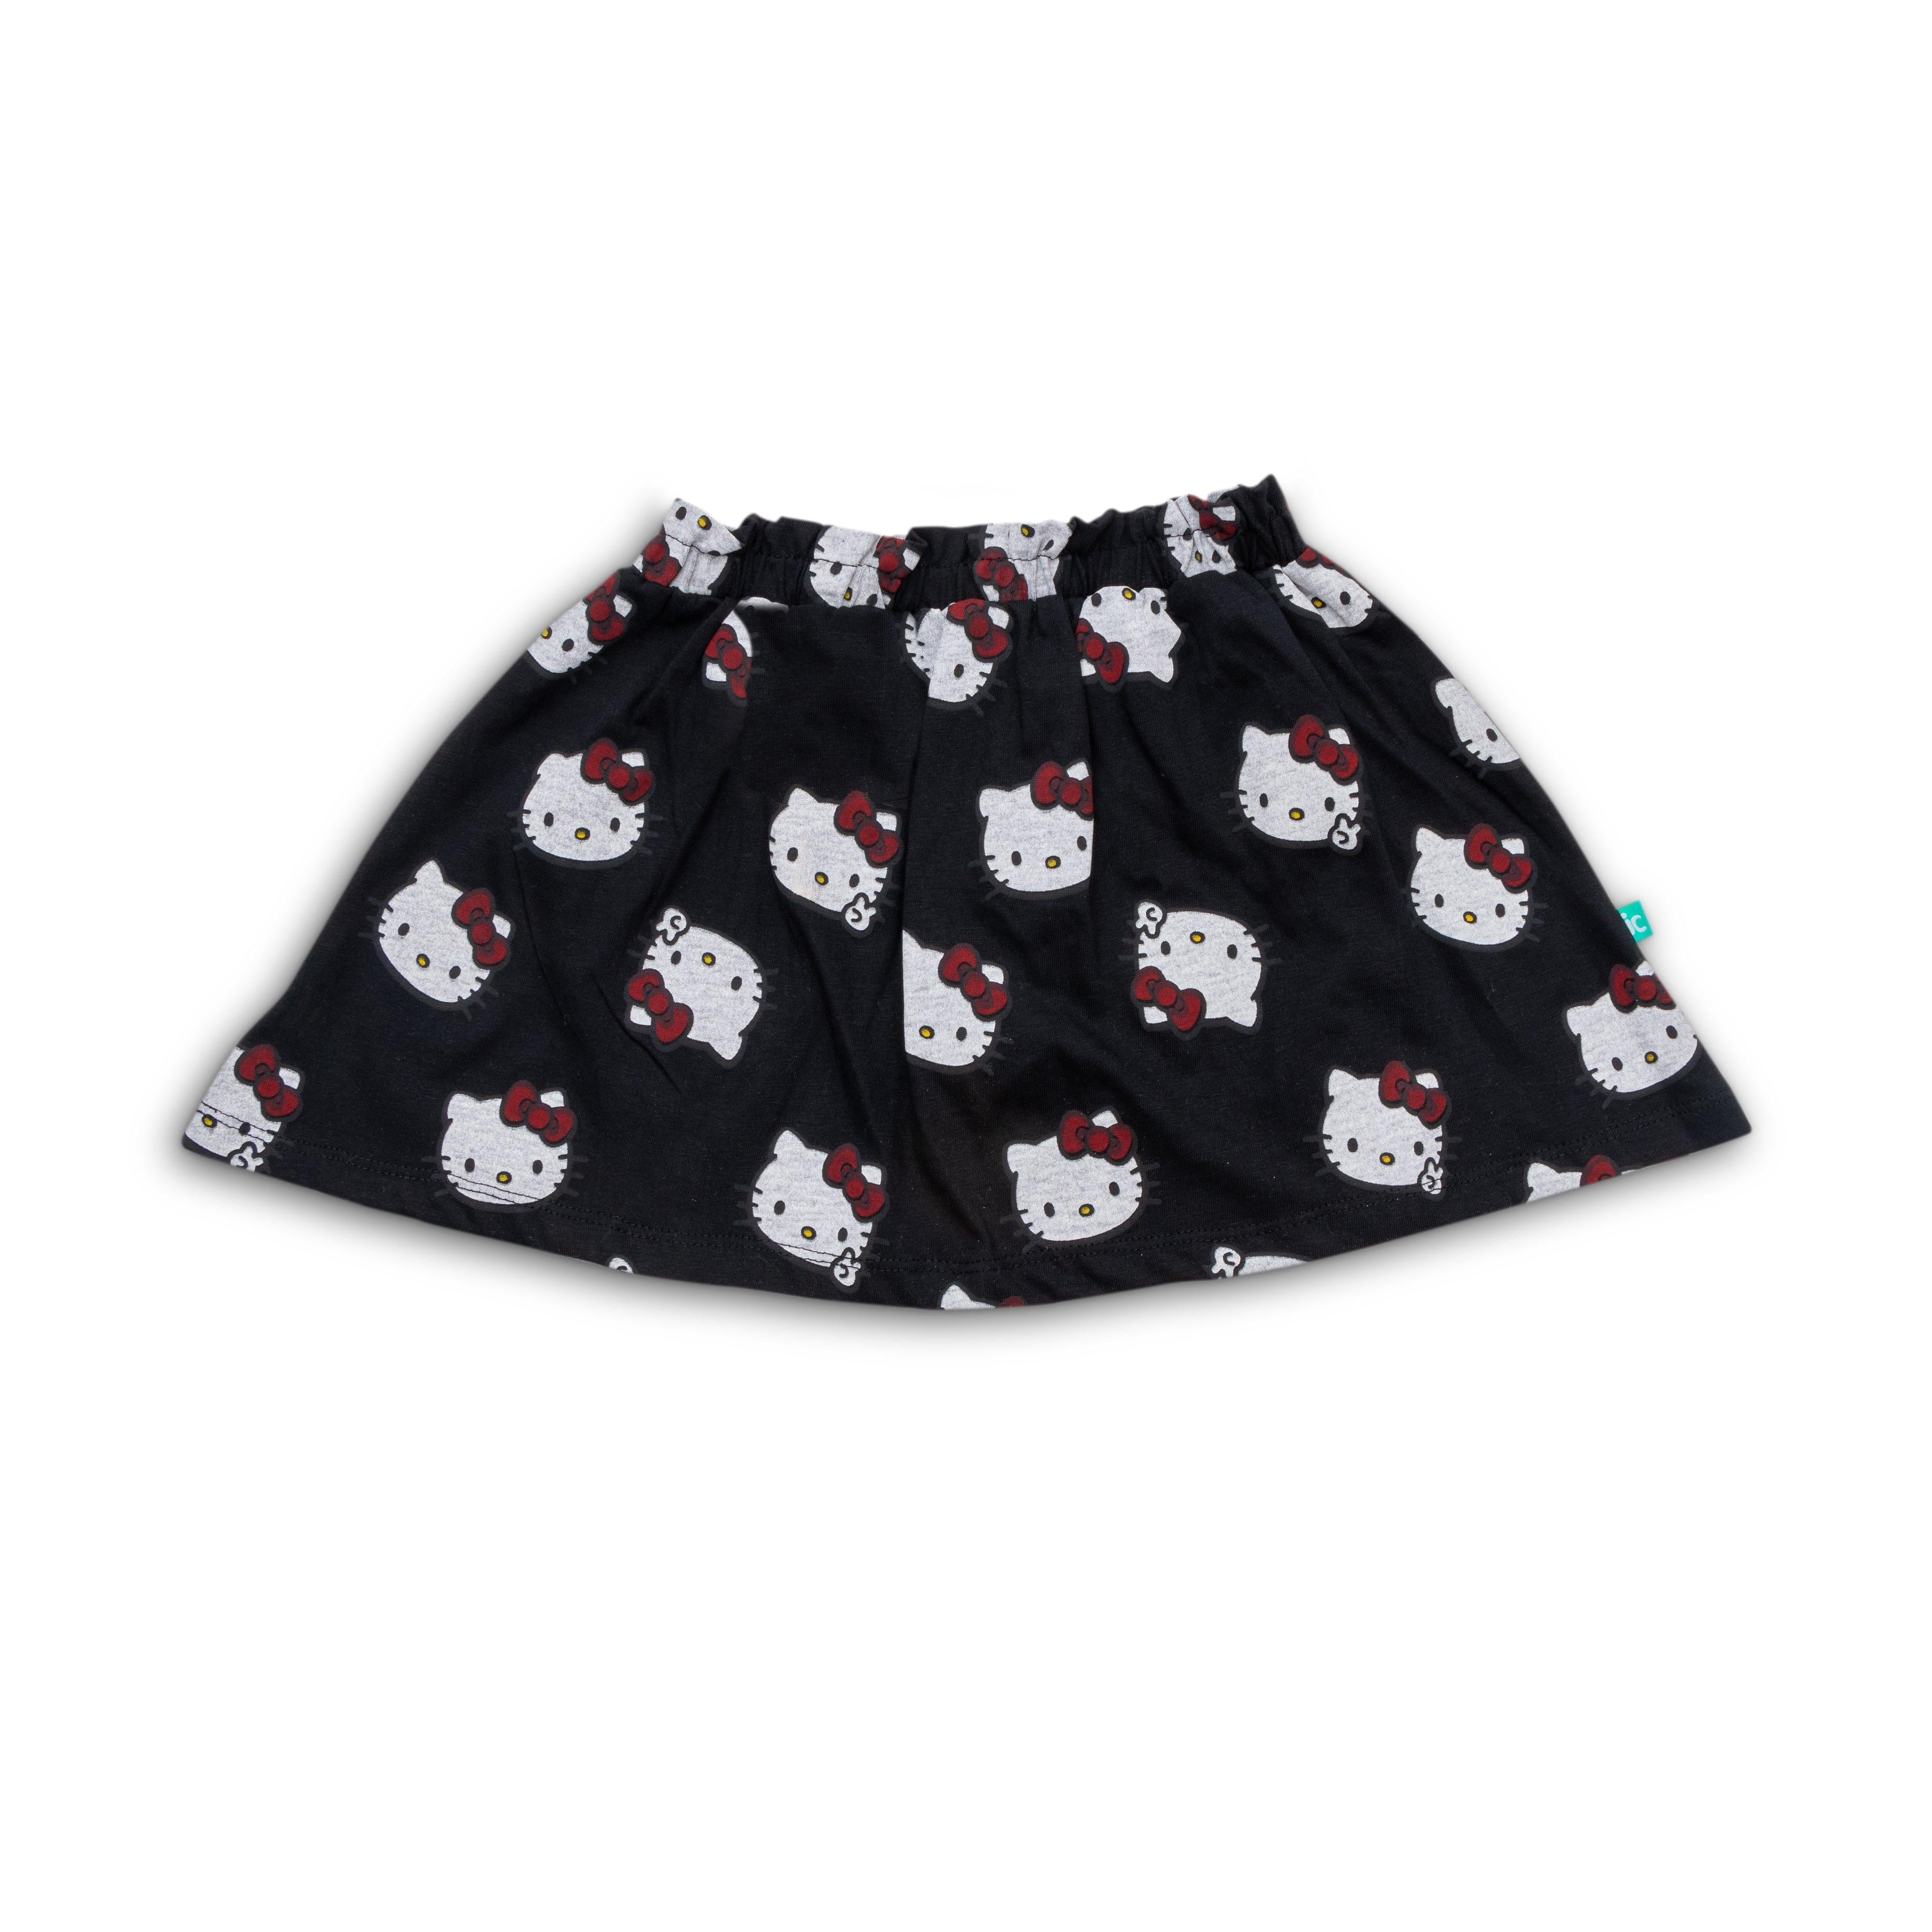 Hello Kitty Skirts Printed Combo Skirts - Blue & Black - Juscubs